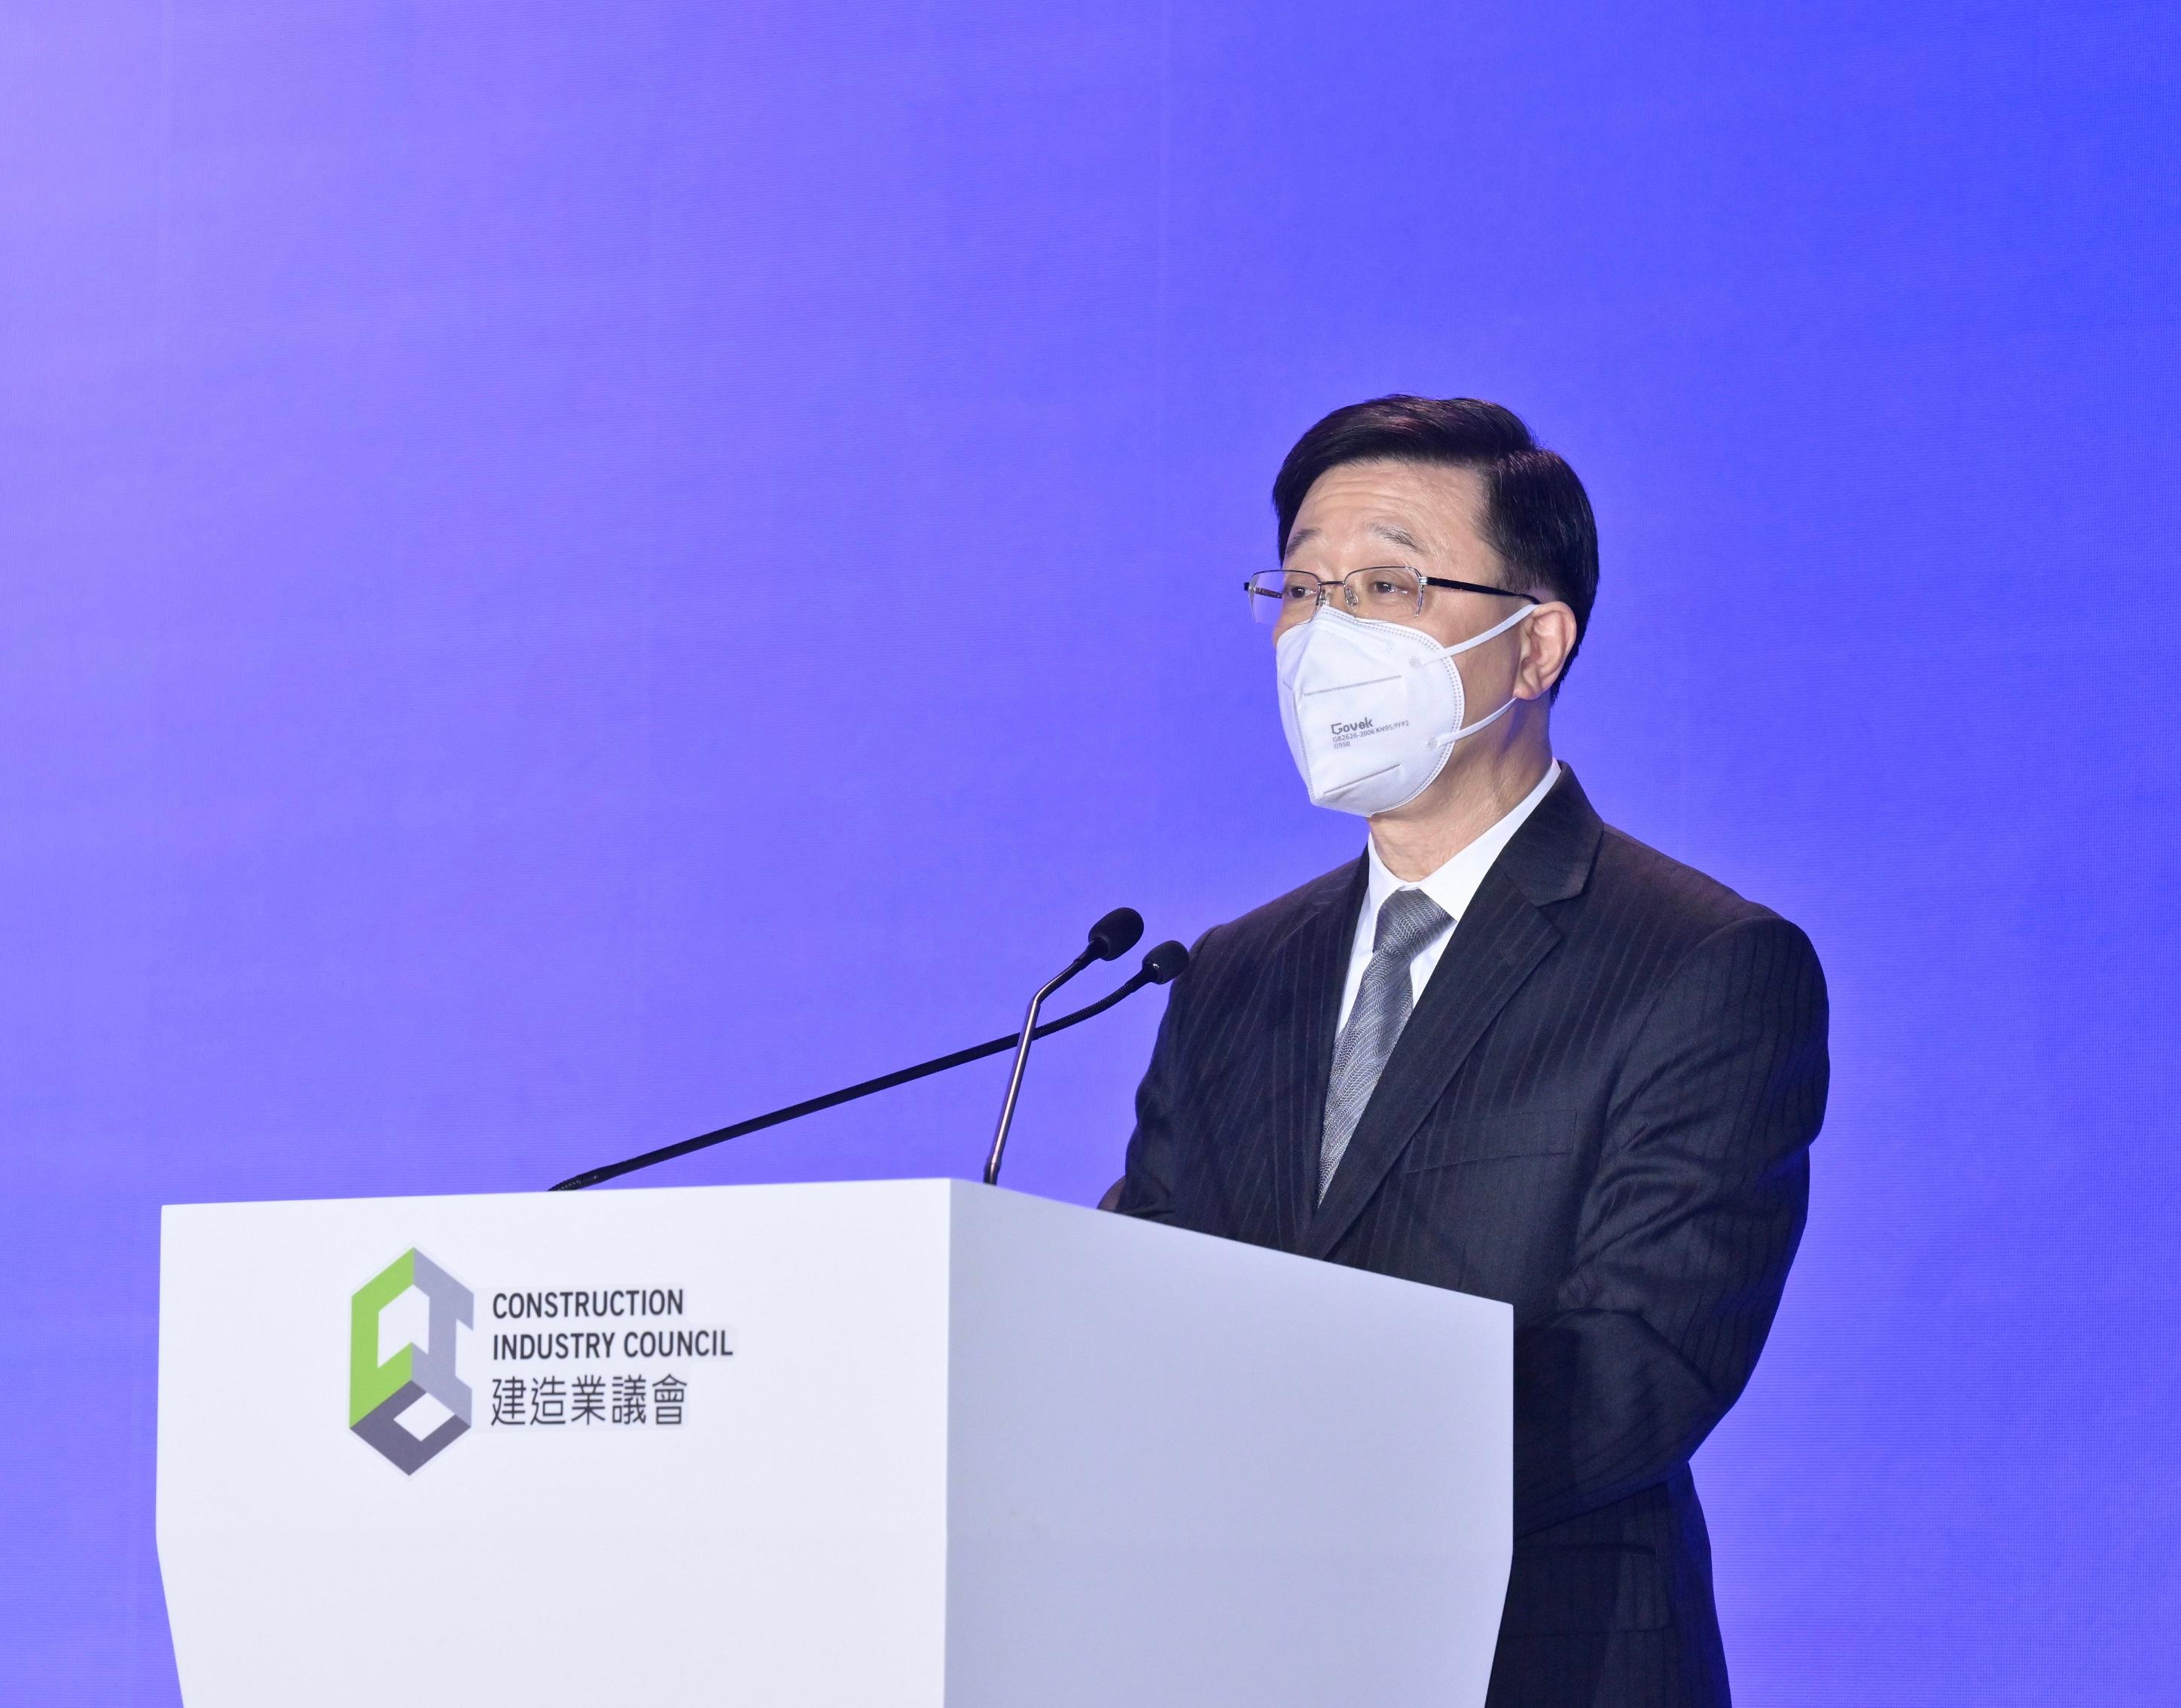 The Chief Executive, Mr John Lee, speaks at the Celebration for the 15th Anniversary of the Construction Industry Council and the Hong Kong Construction Exhibition Grand Opening Ceremony today (October 31).